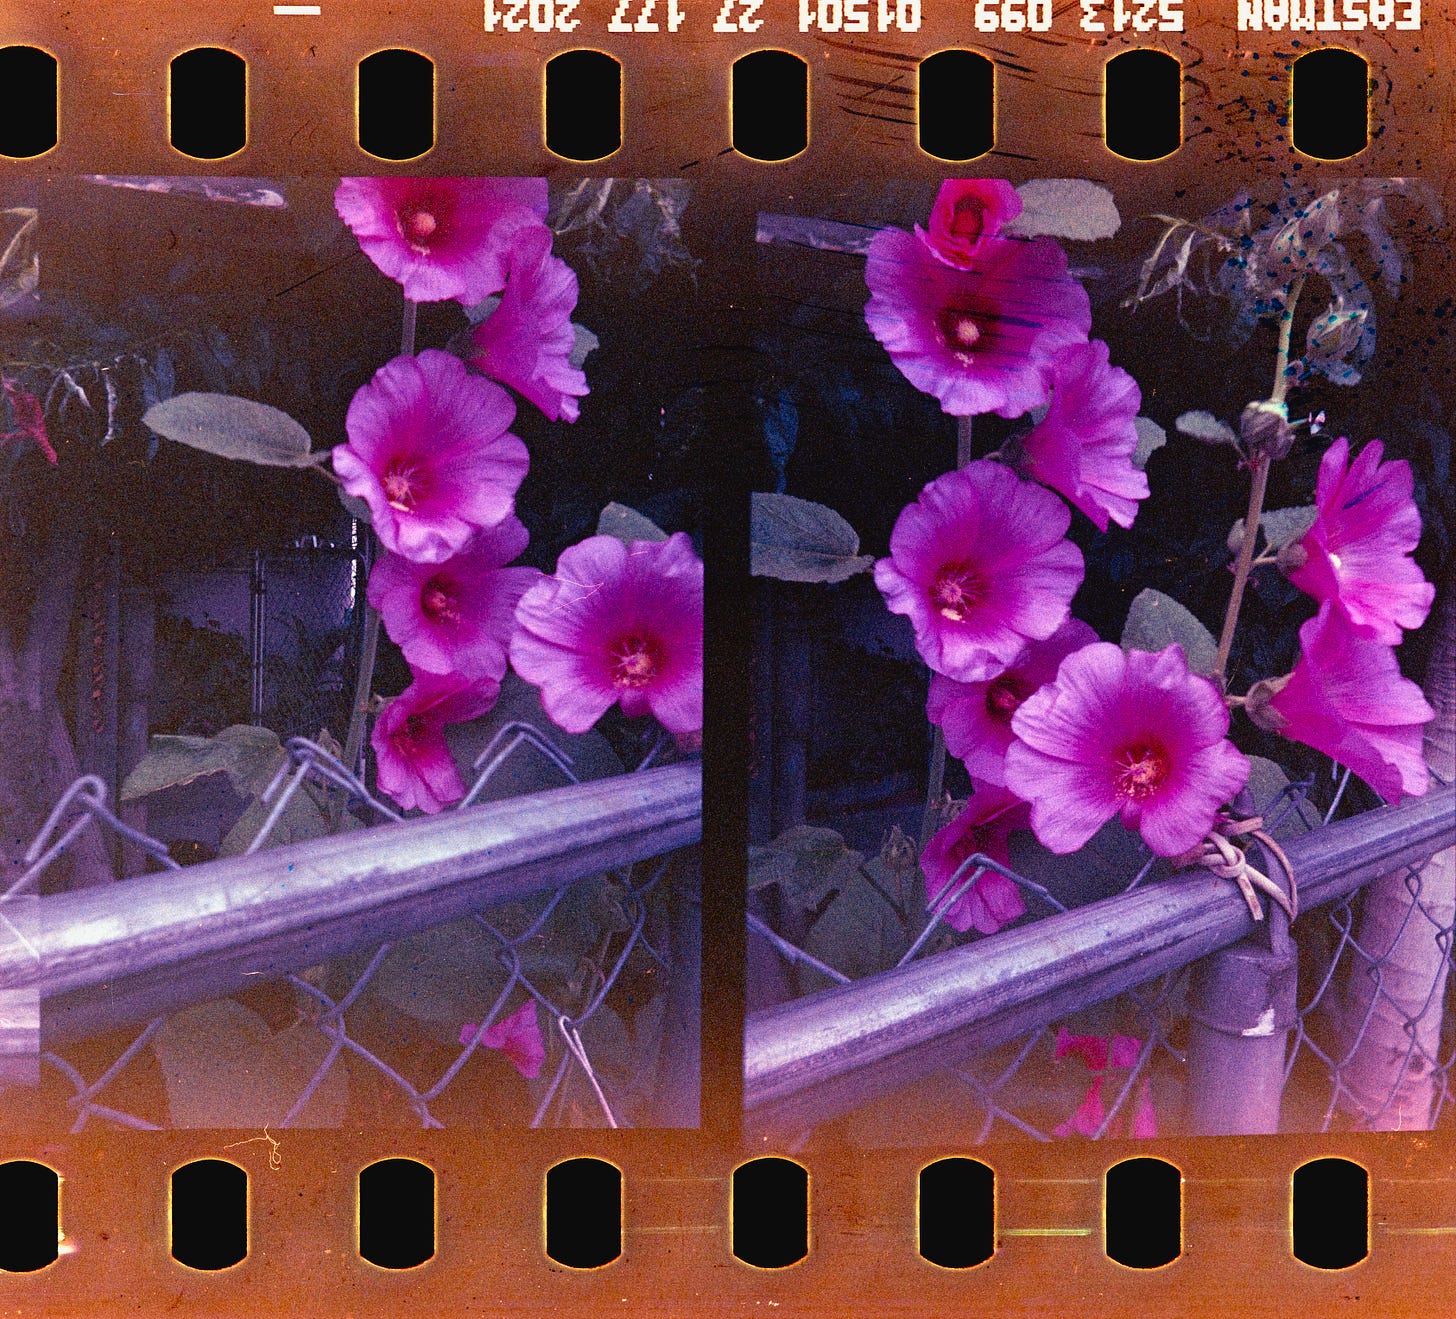 two photos of the same floral blooms, bright pink/purple, behind a metal fence.